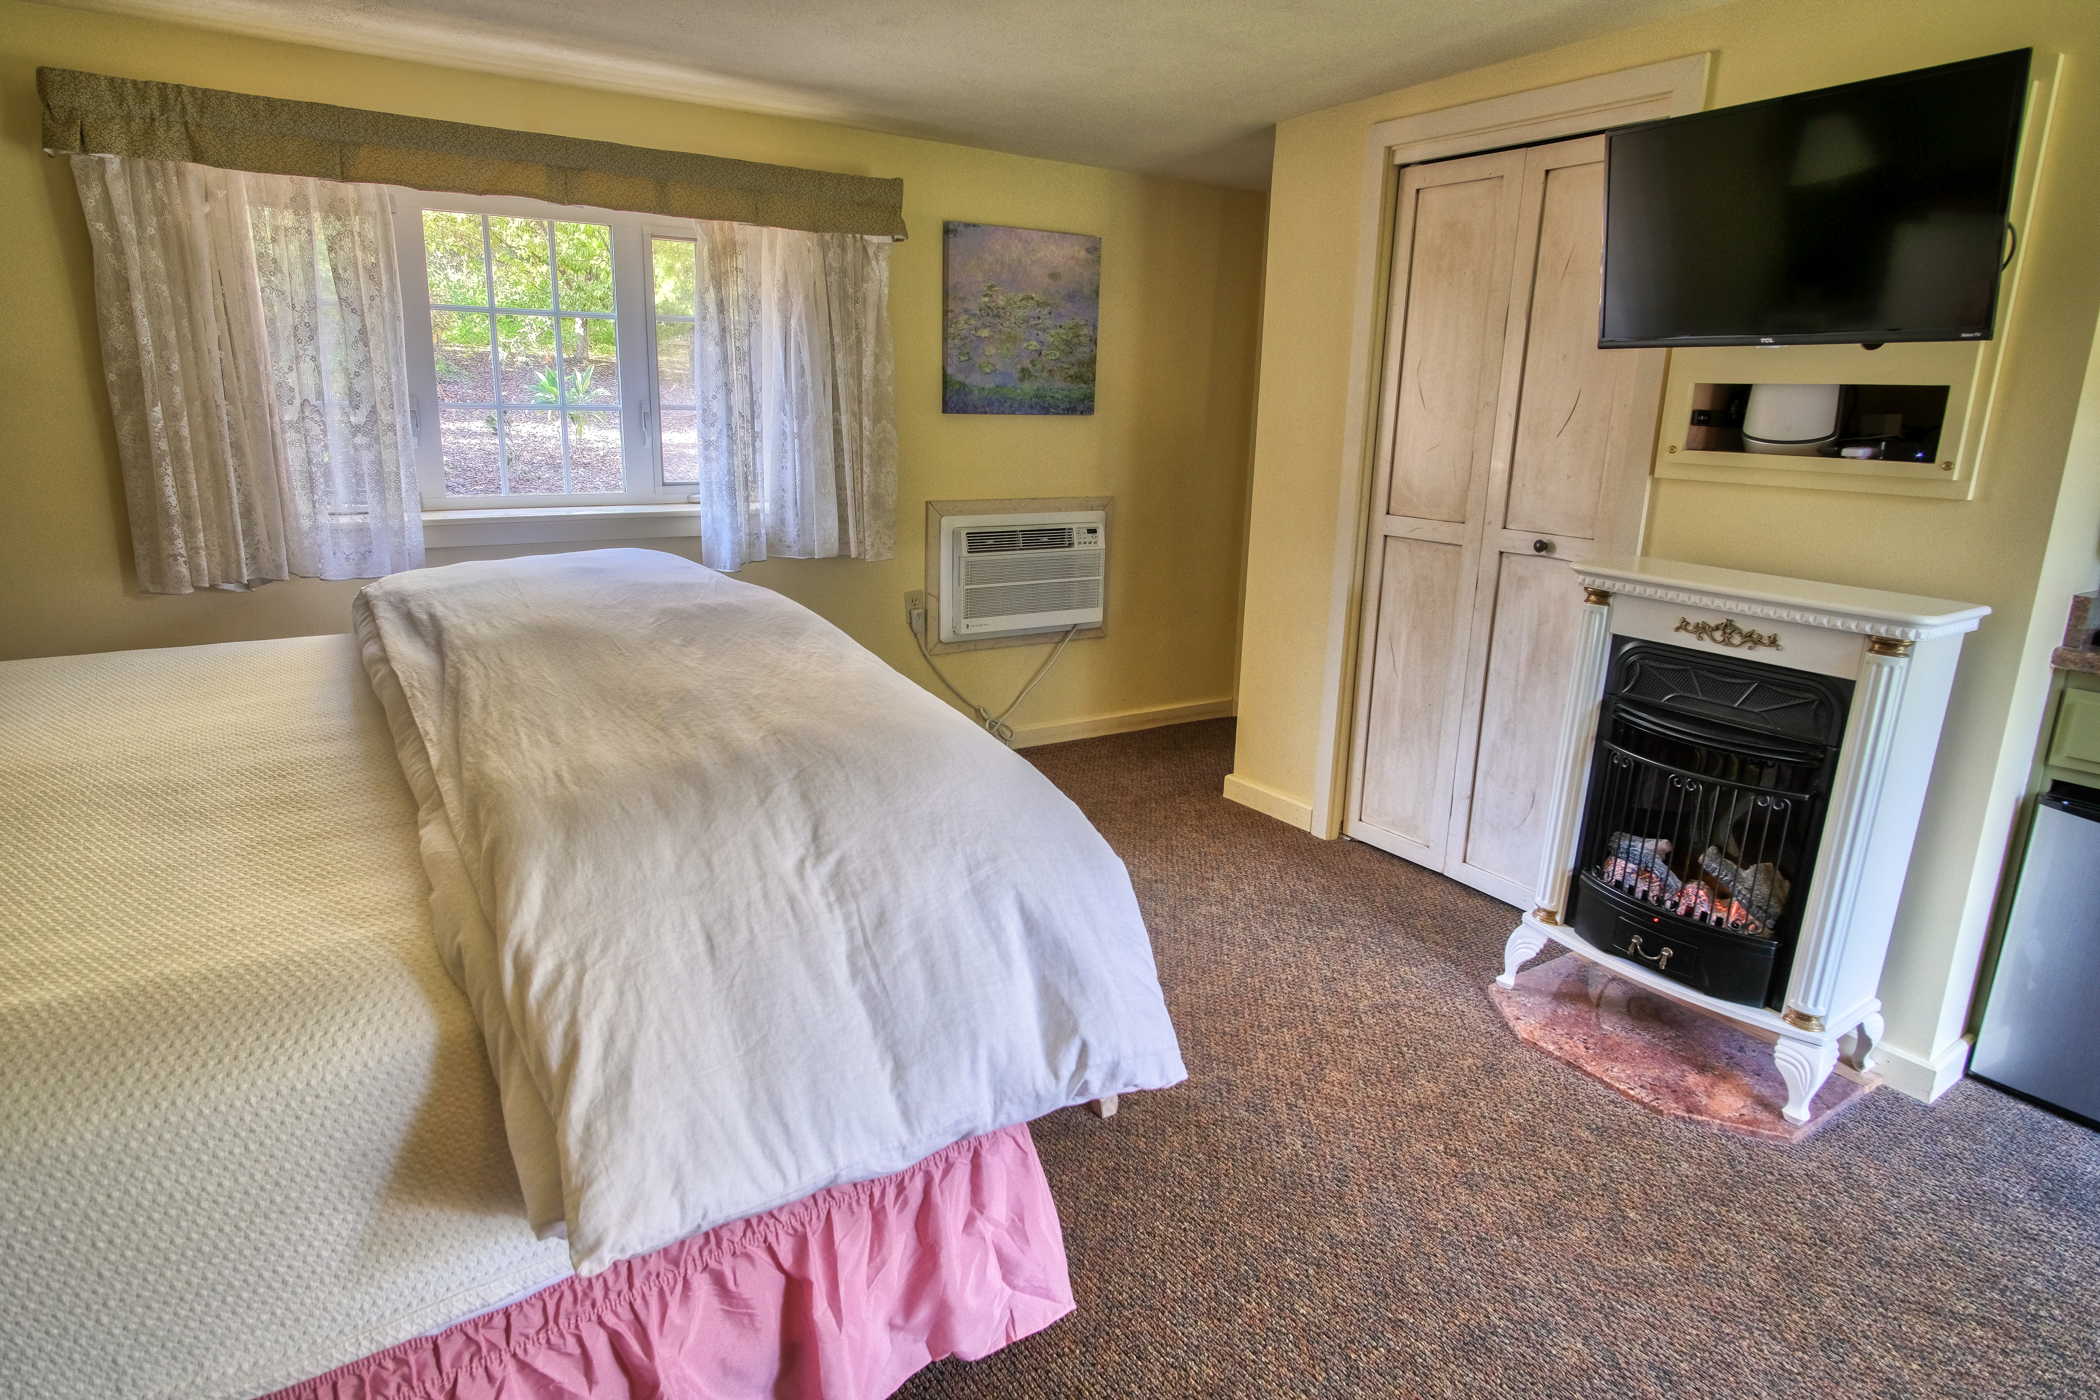  The Cottage at Country Willows Inn & Estate in Ashland, Oregon has a king size bed with comfortable quilts and linens. 